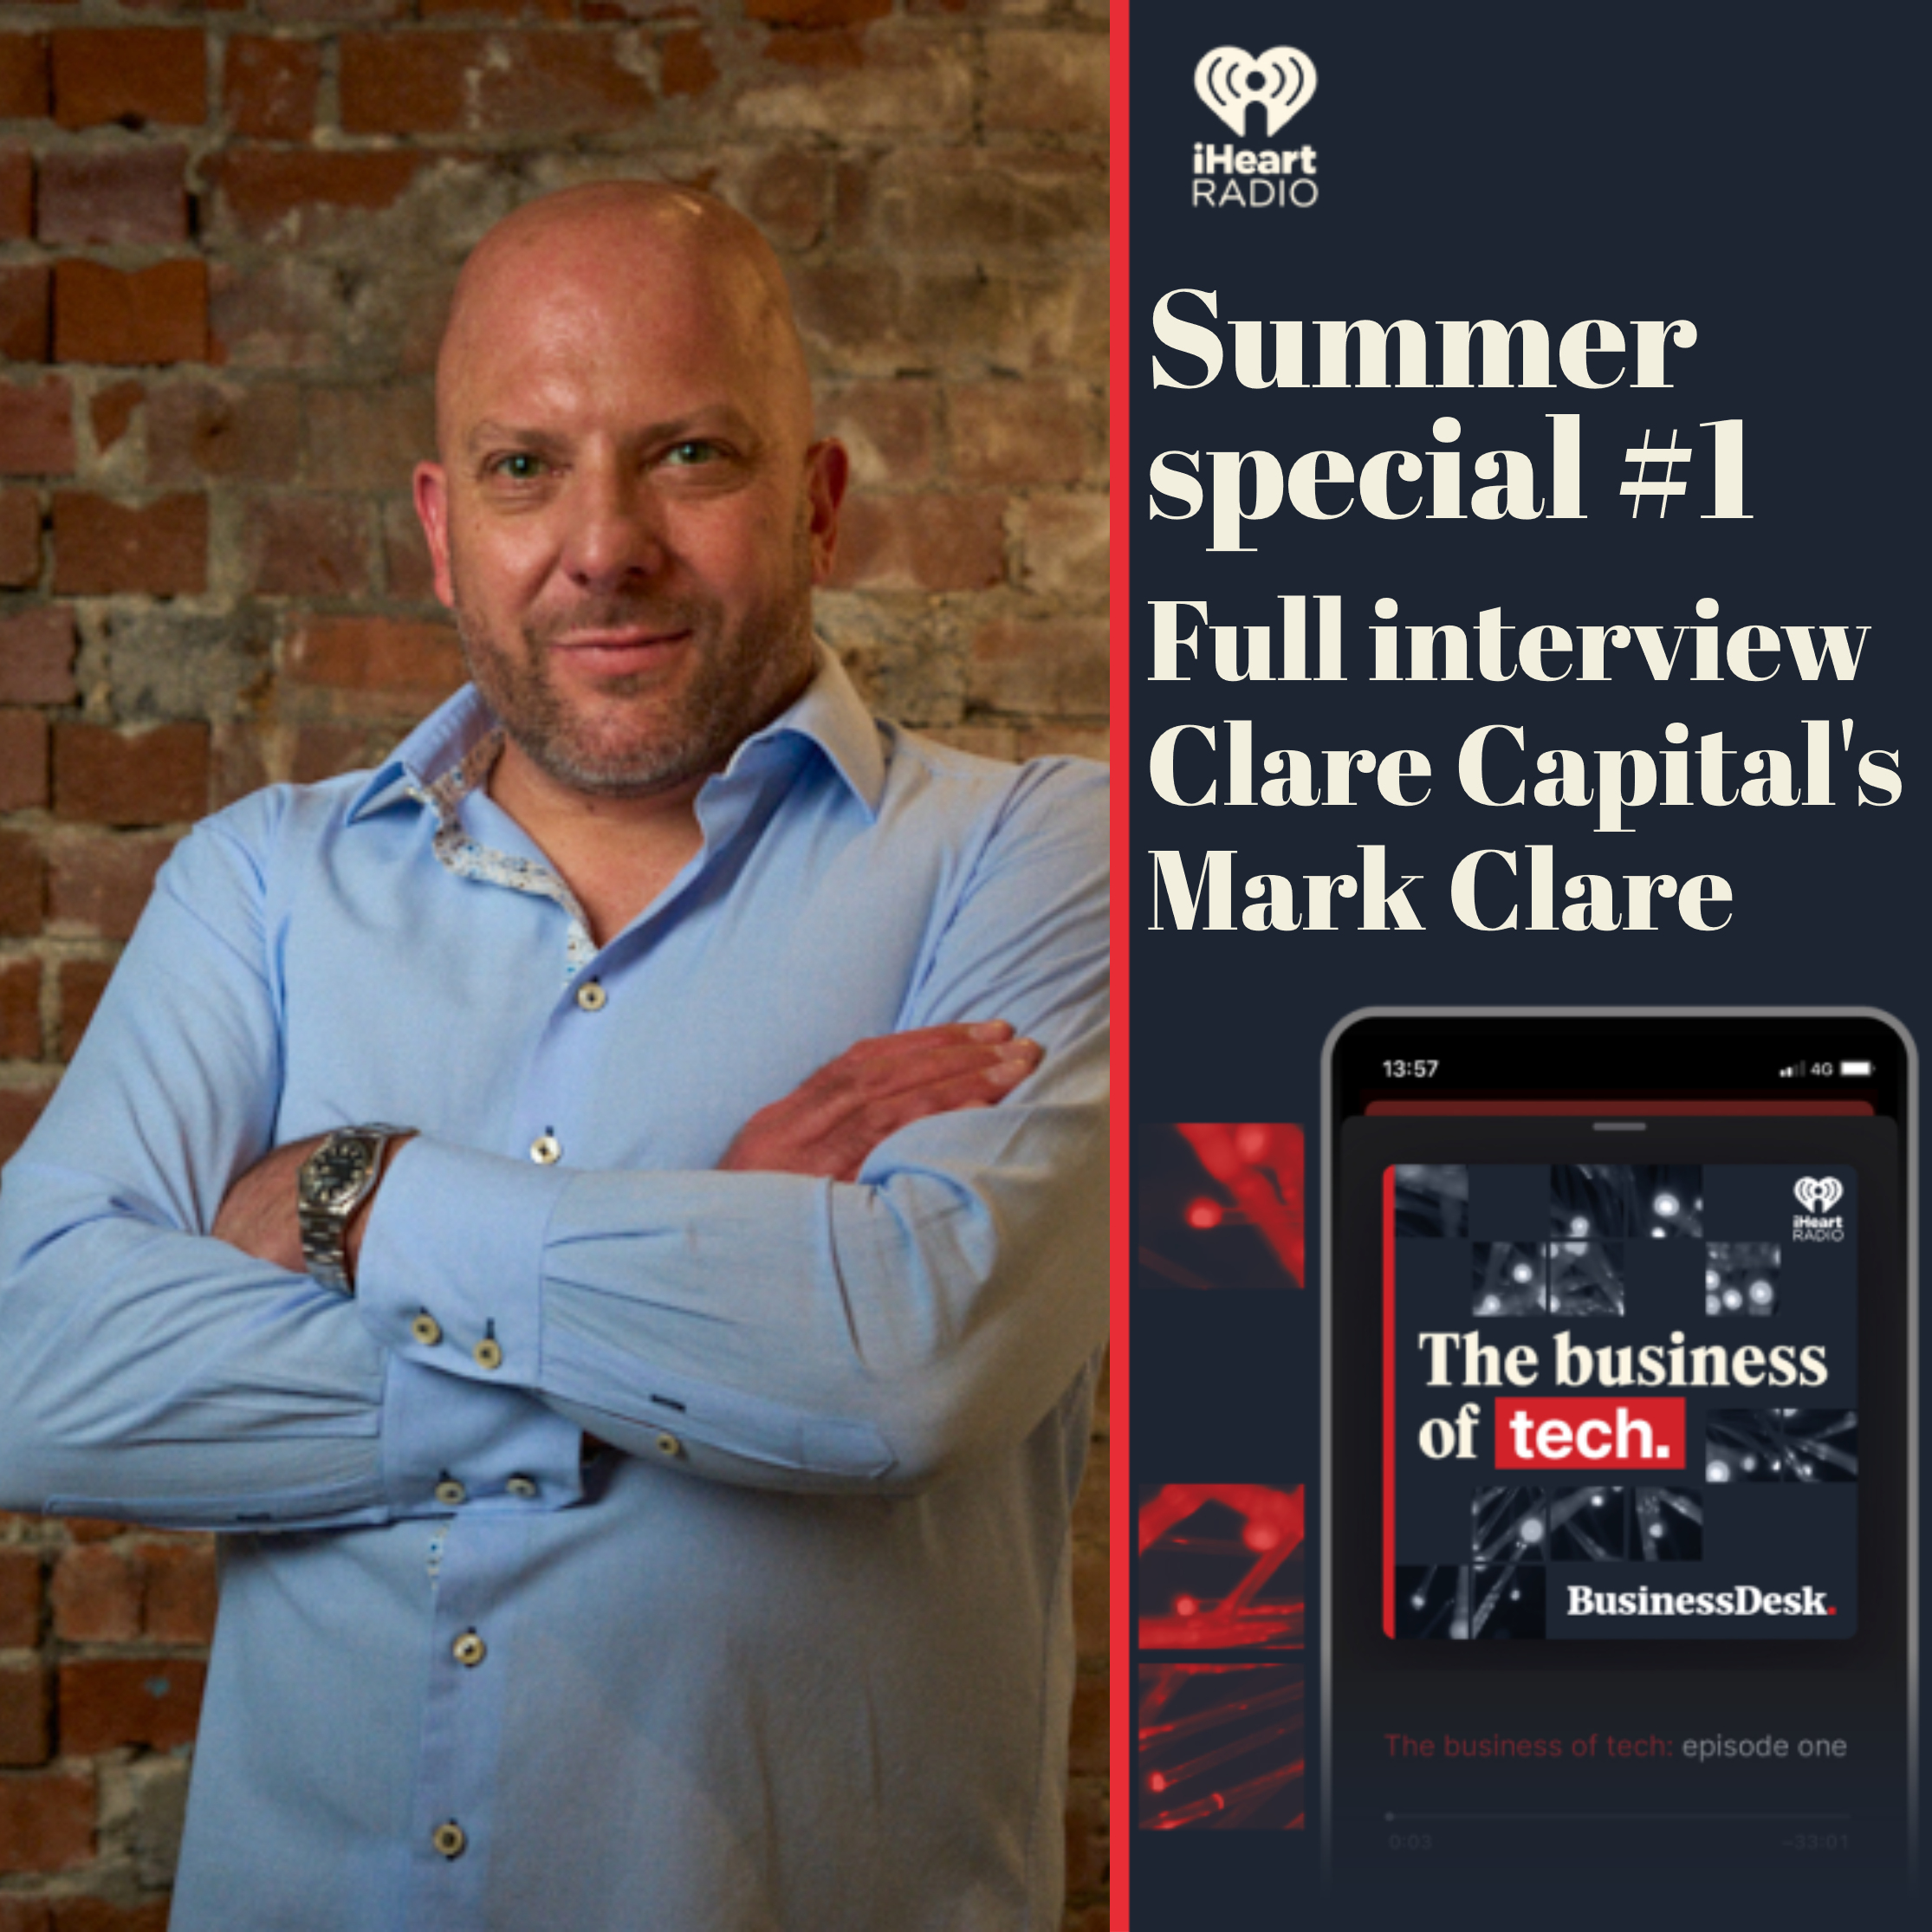 Summer special - Full interview with Clare Capital's Mark Clare